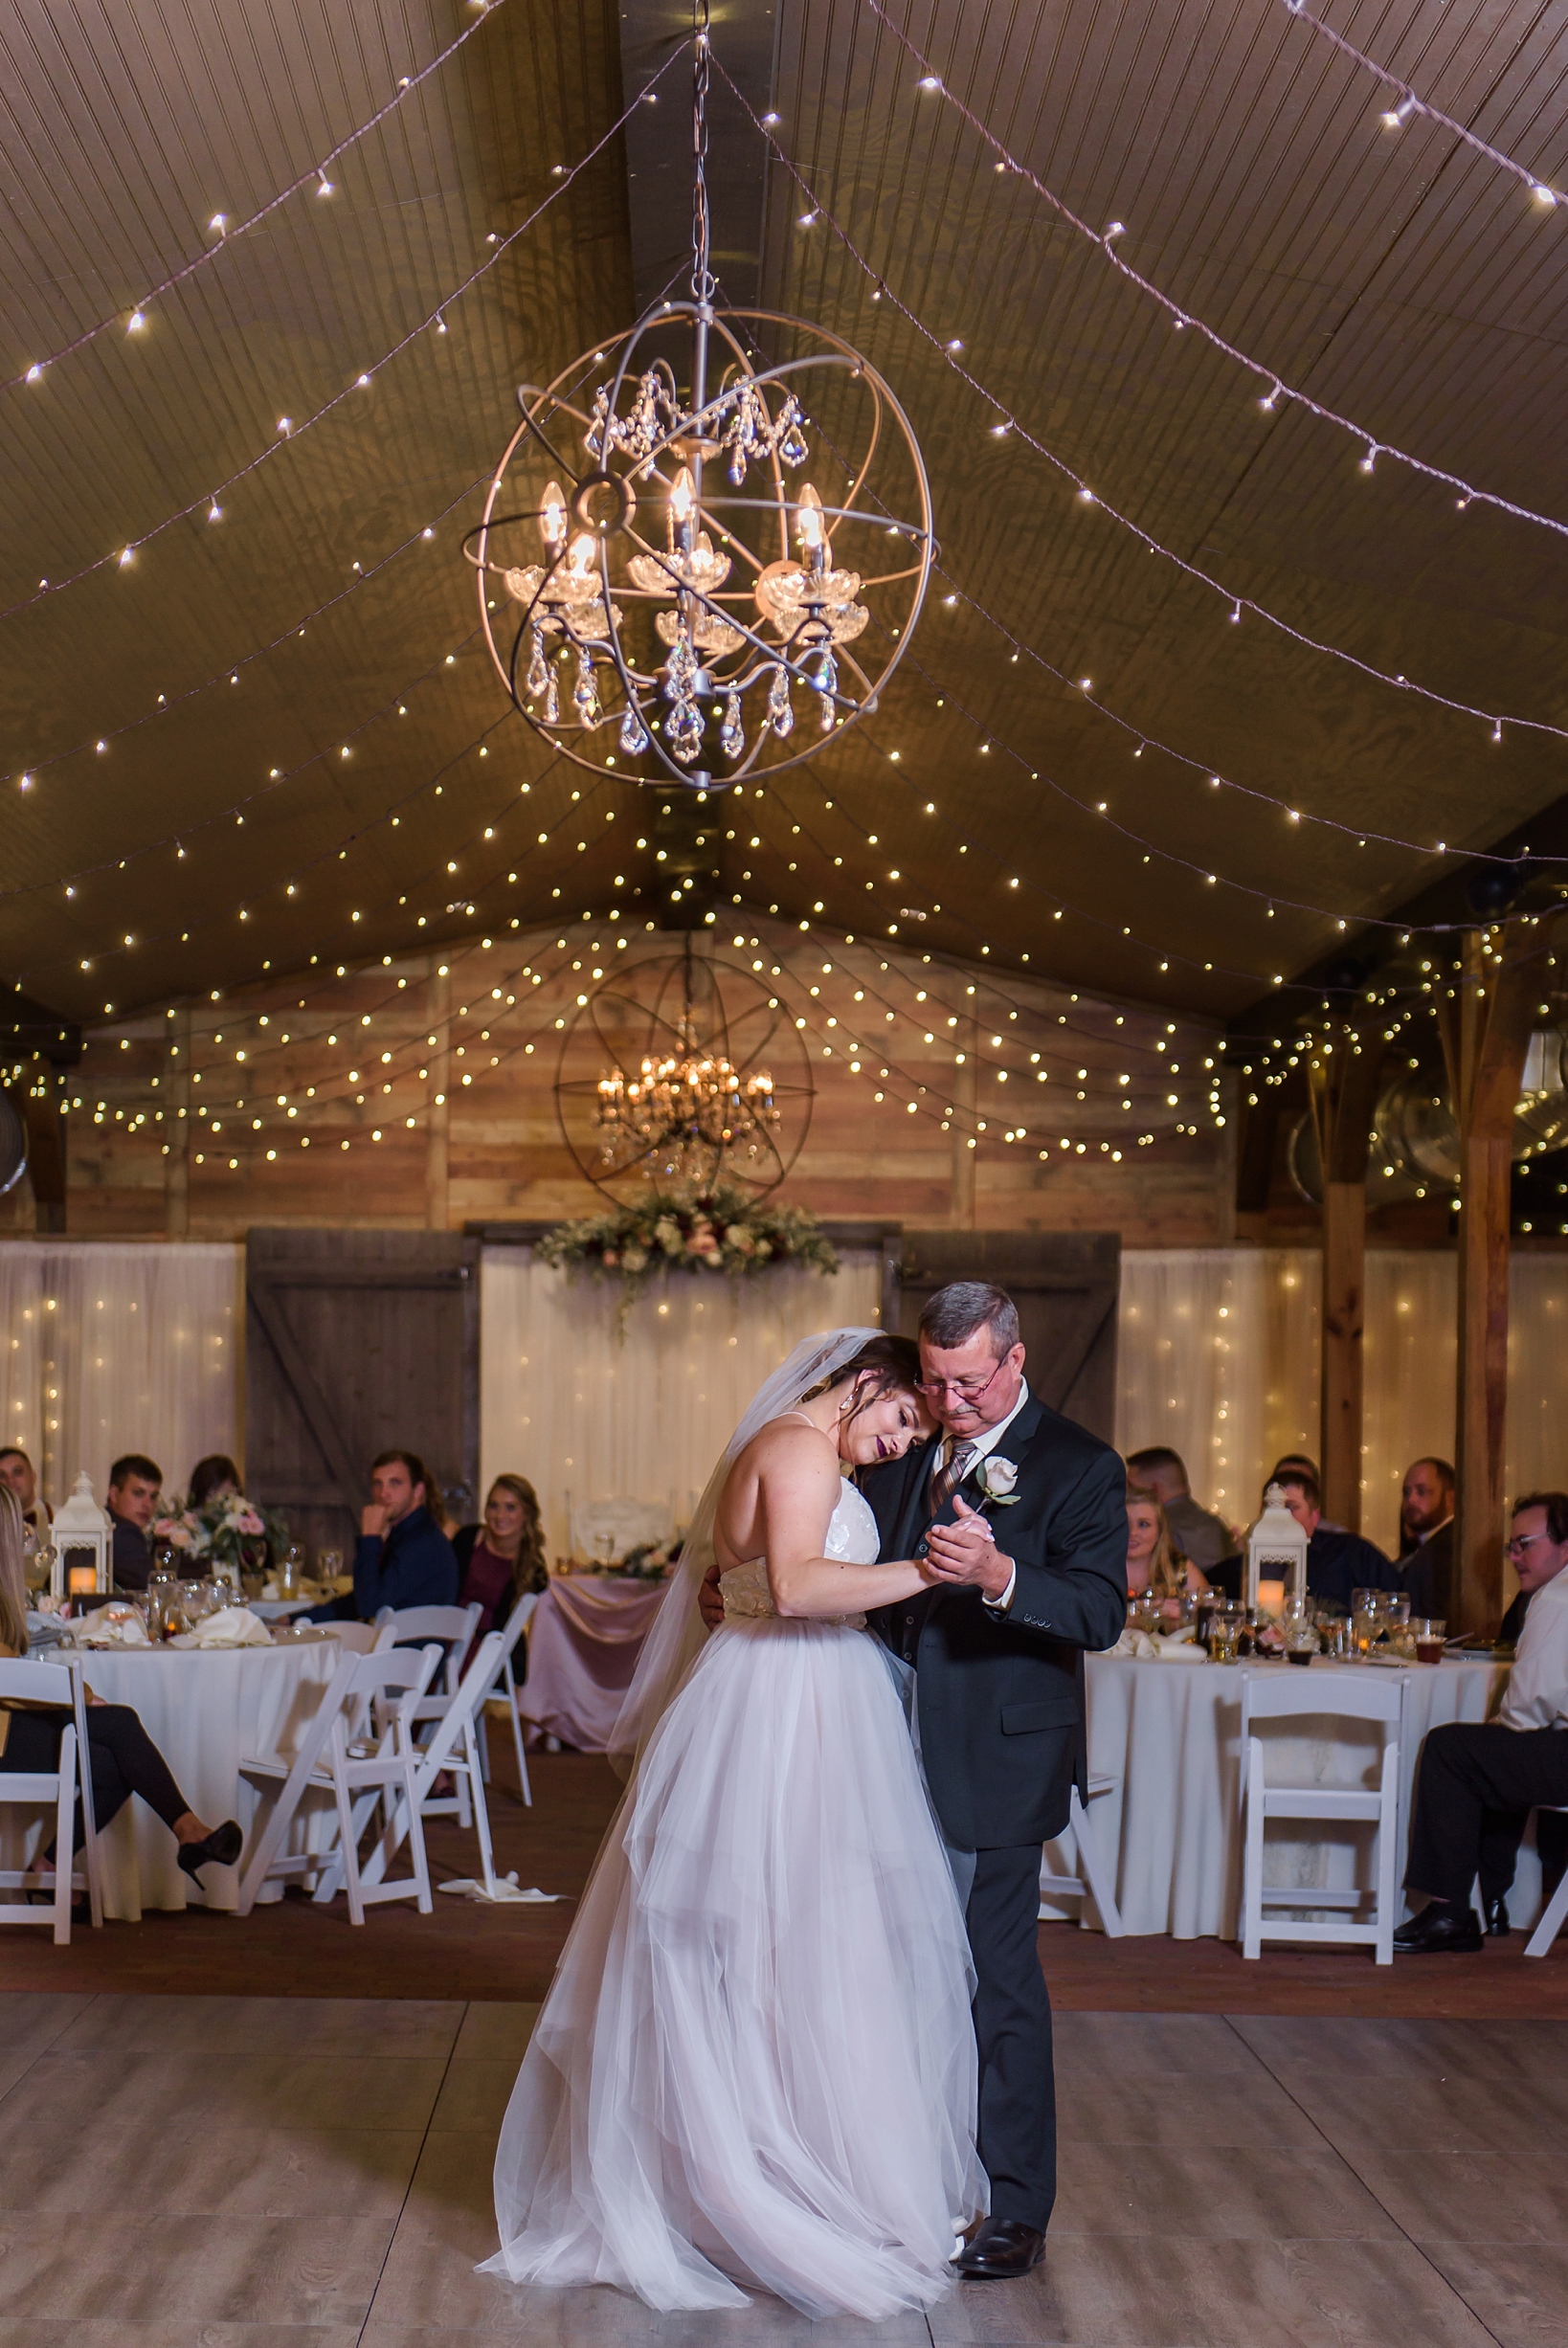 Father daughter dance in a rustic barn covered in string lights